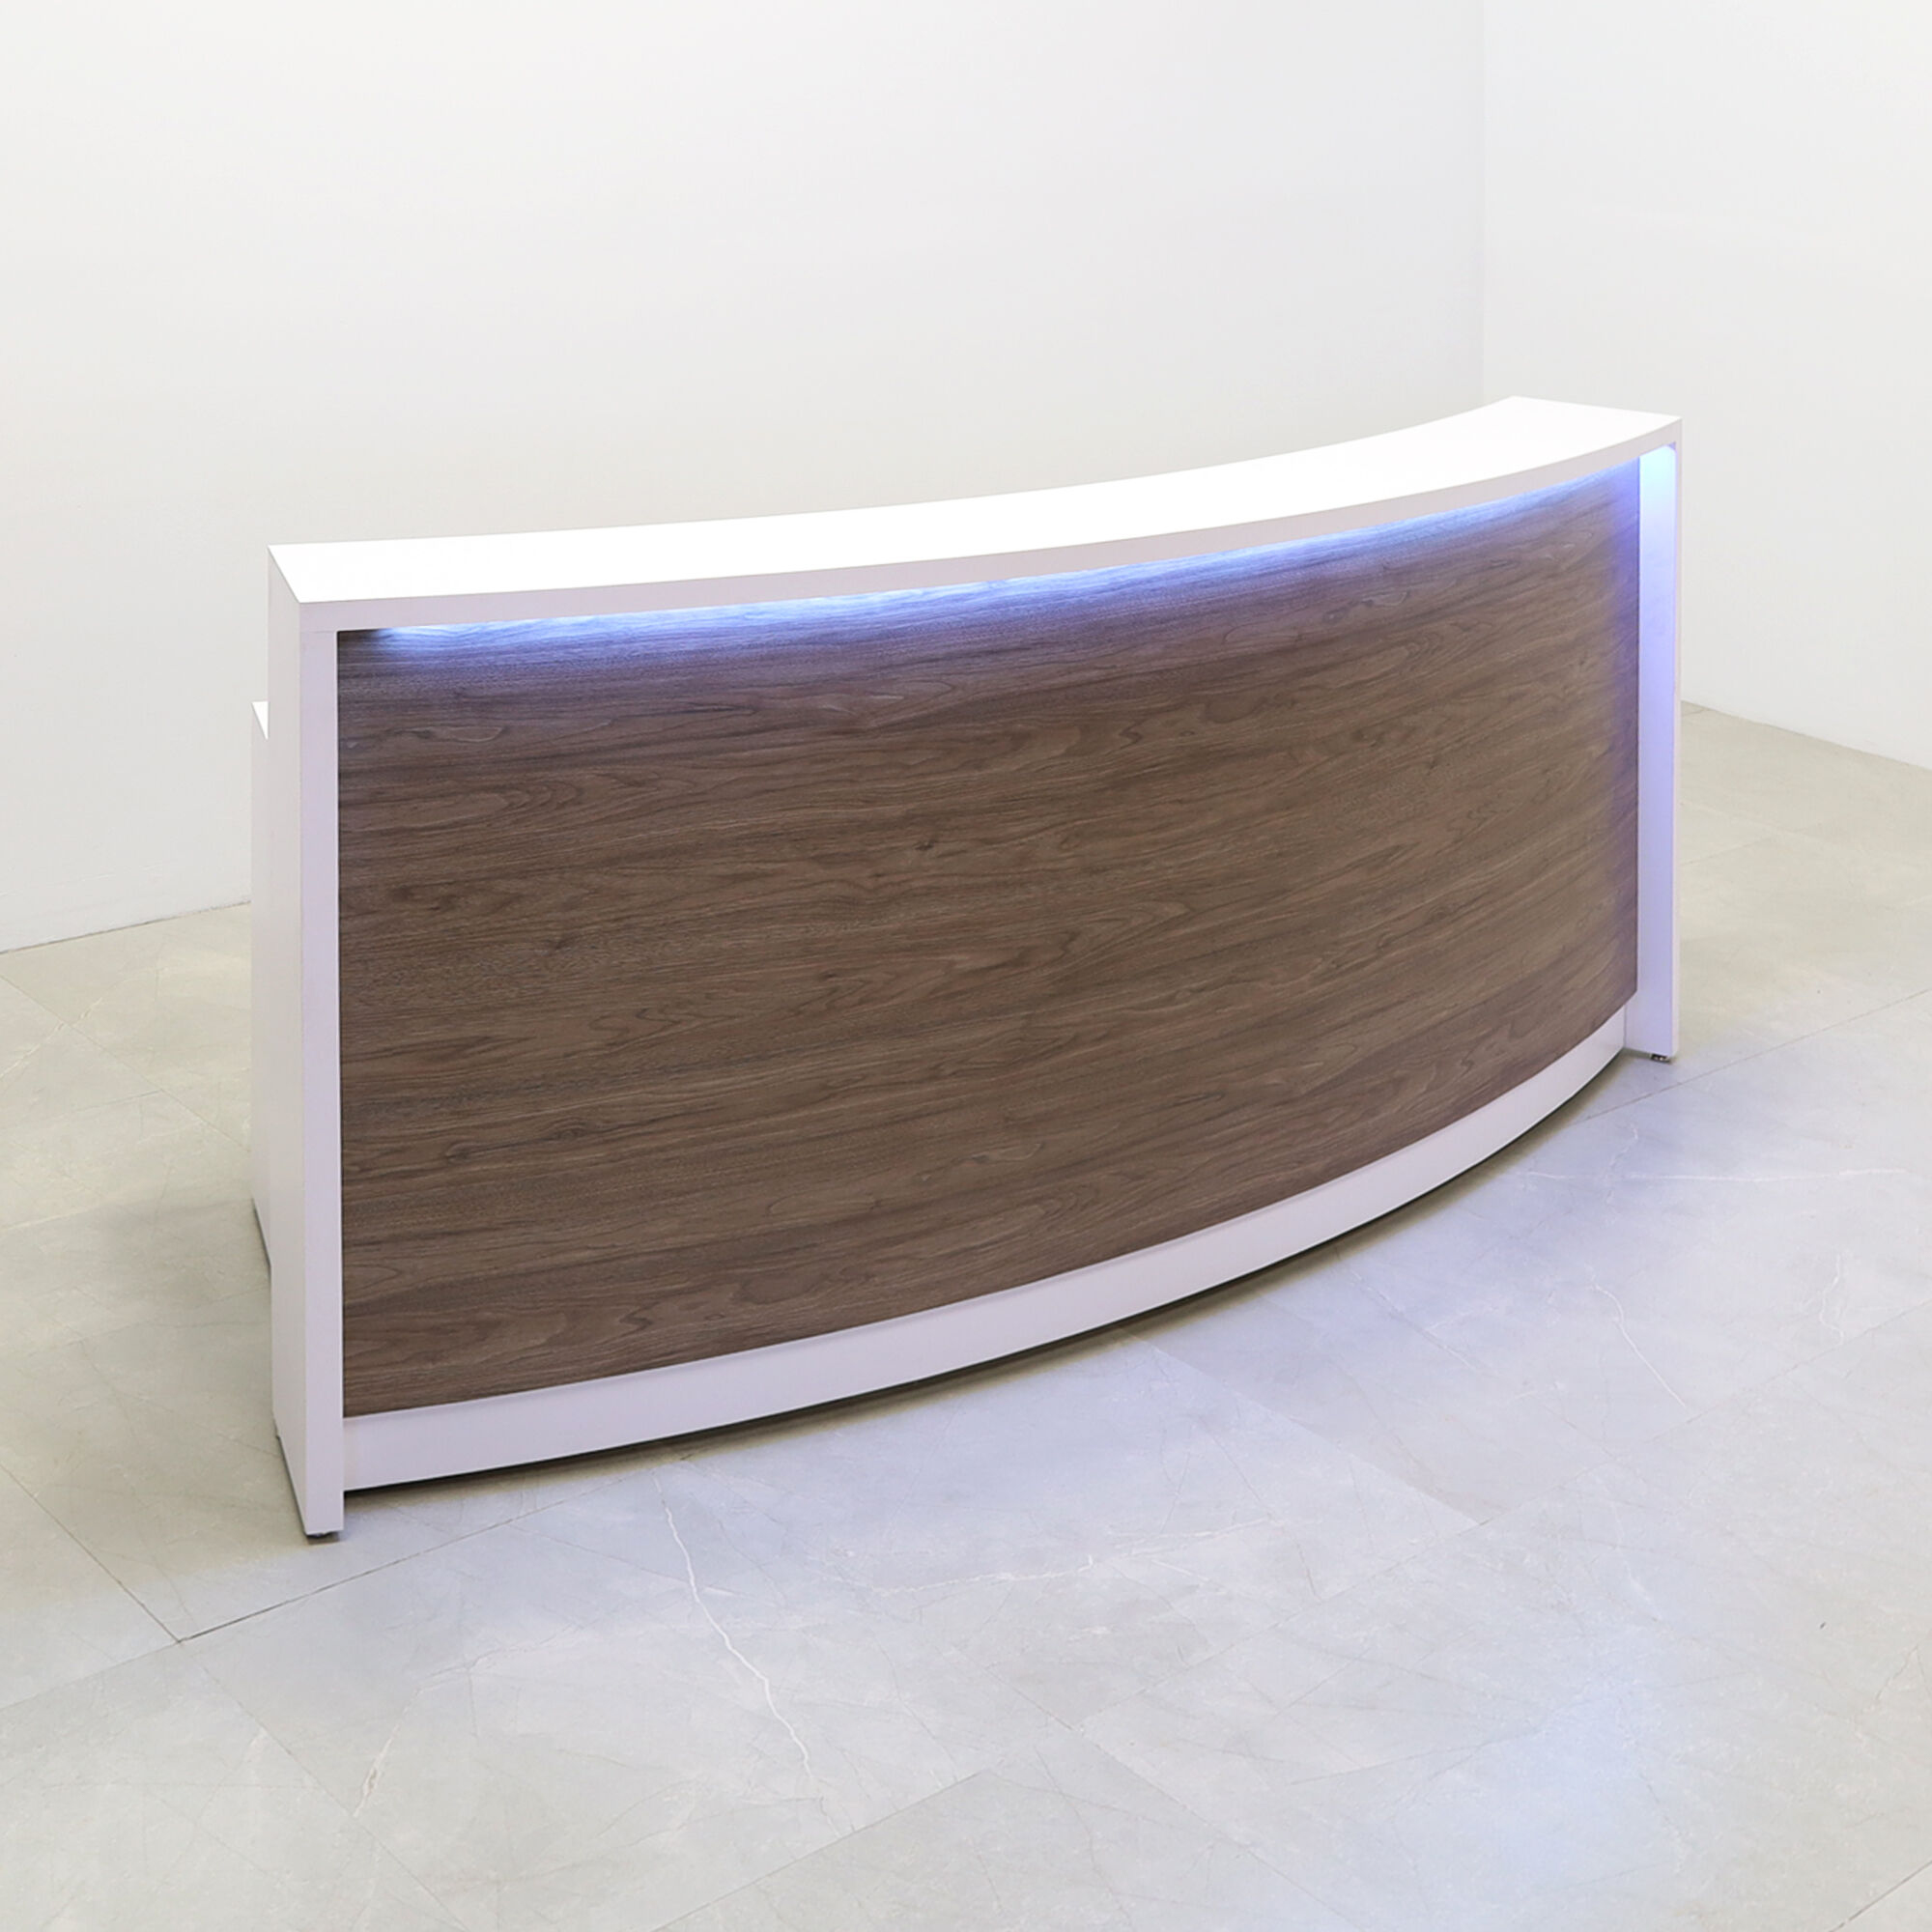 90-inch Seattle X1 Custom Reception Desk in white matte laminate desk, and hazel walnut matte laminate curved front panel, with multi-colored LED, shown here.